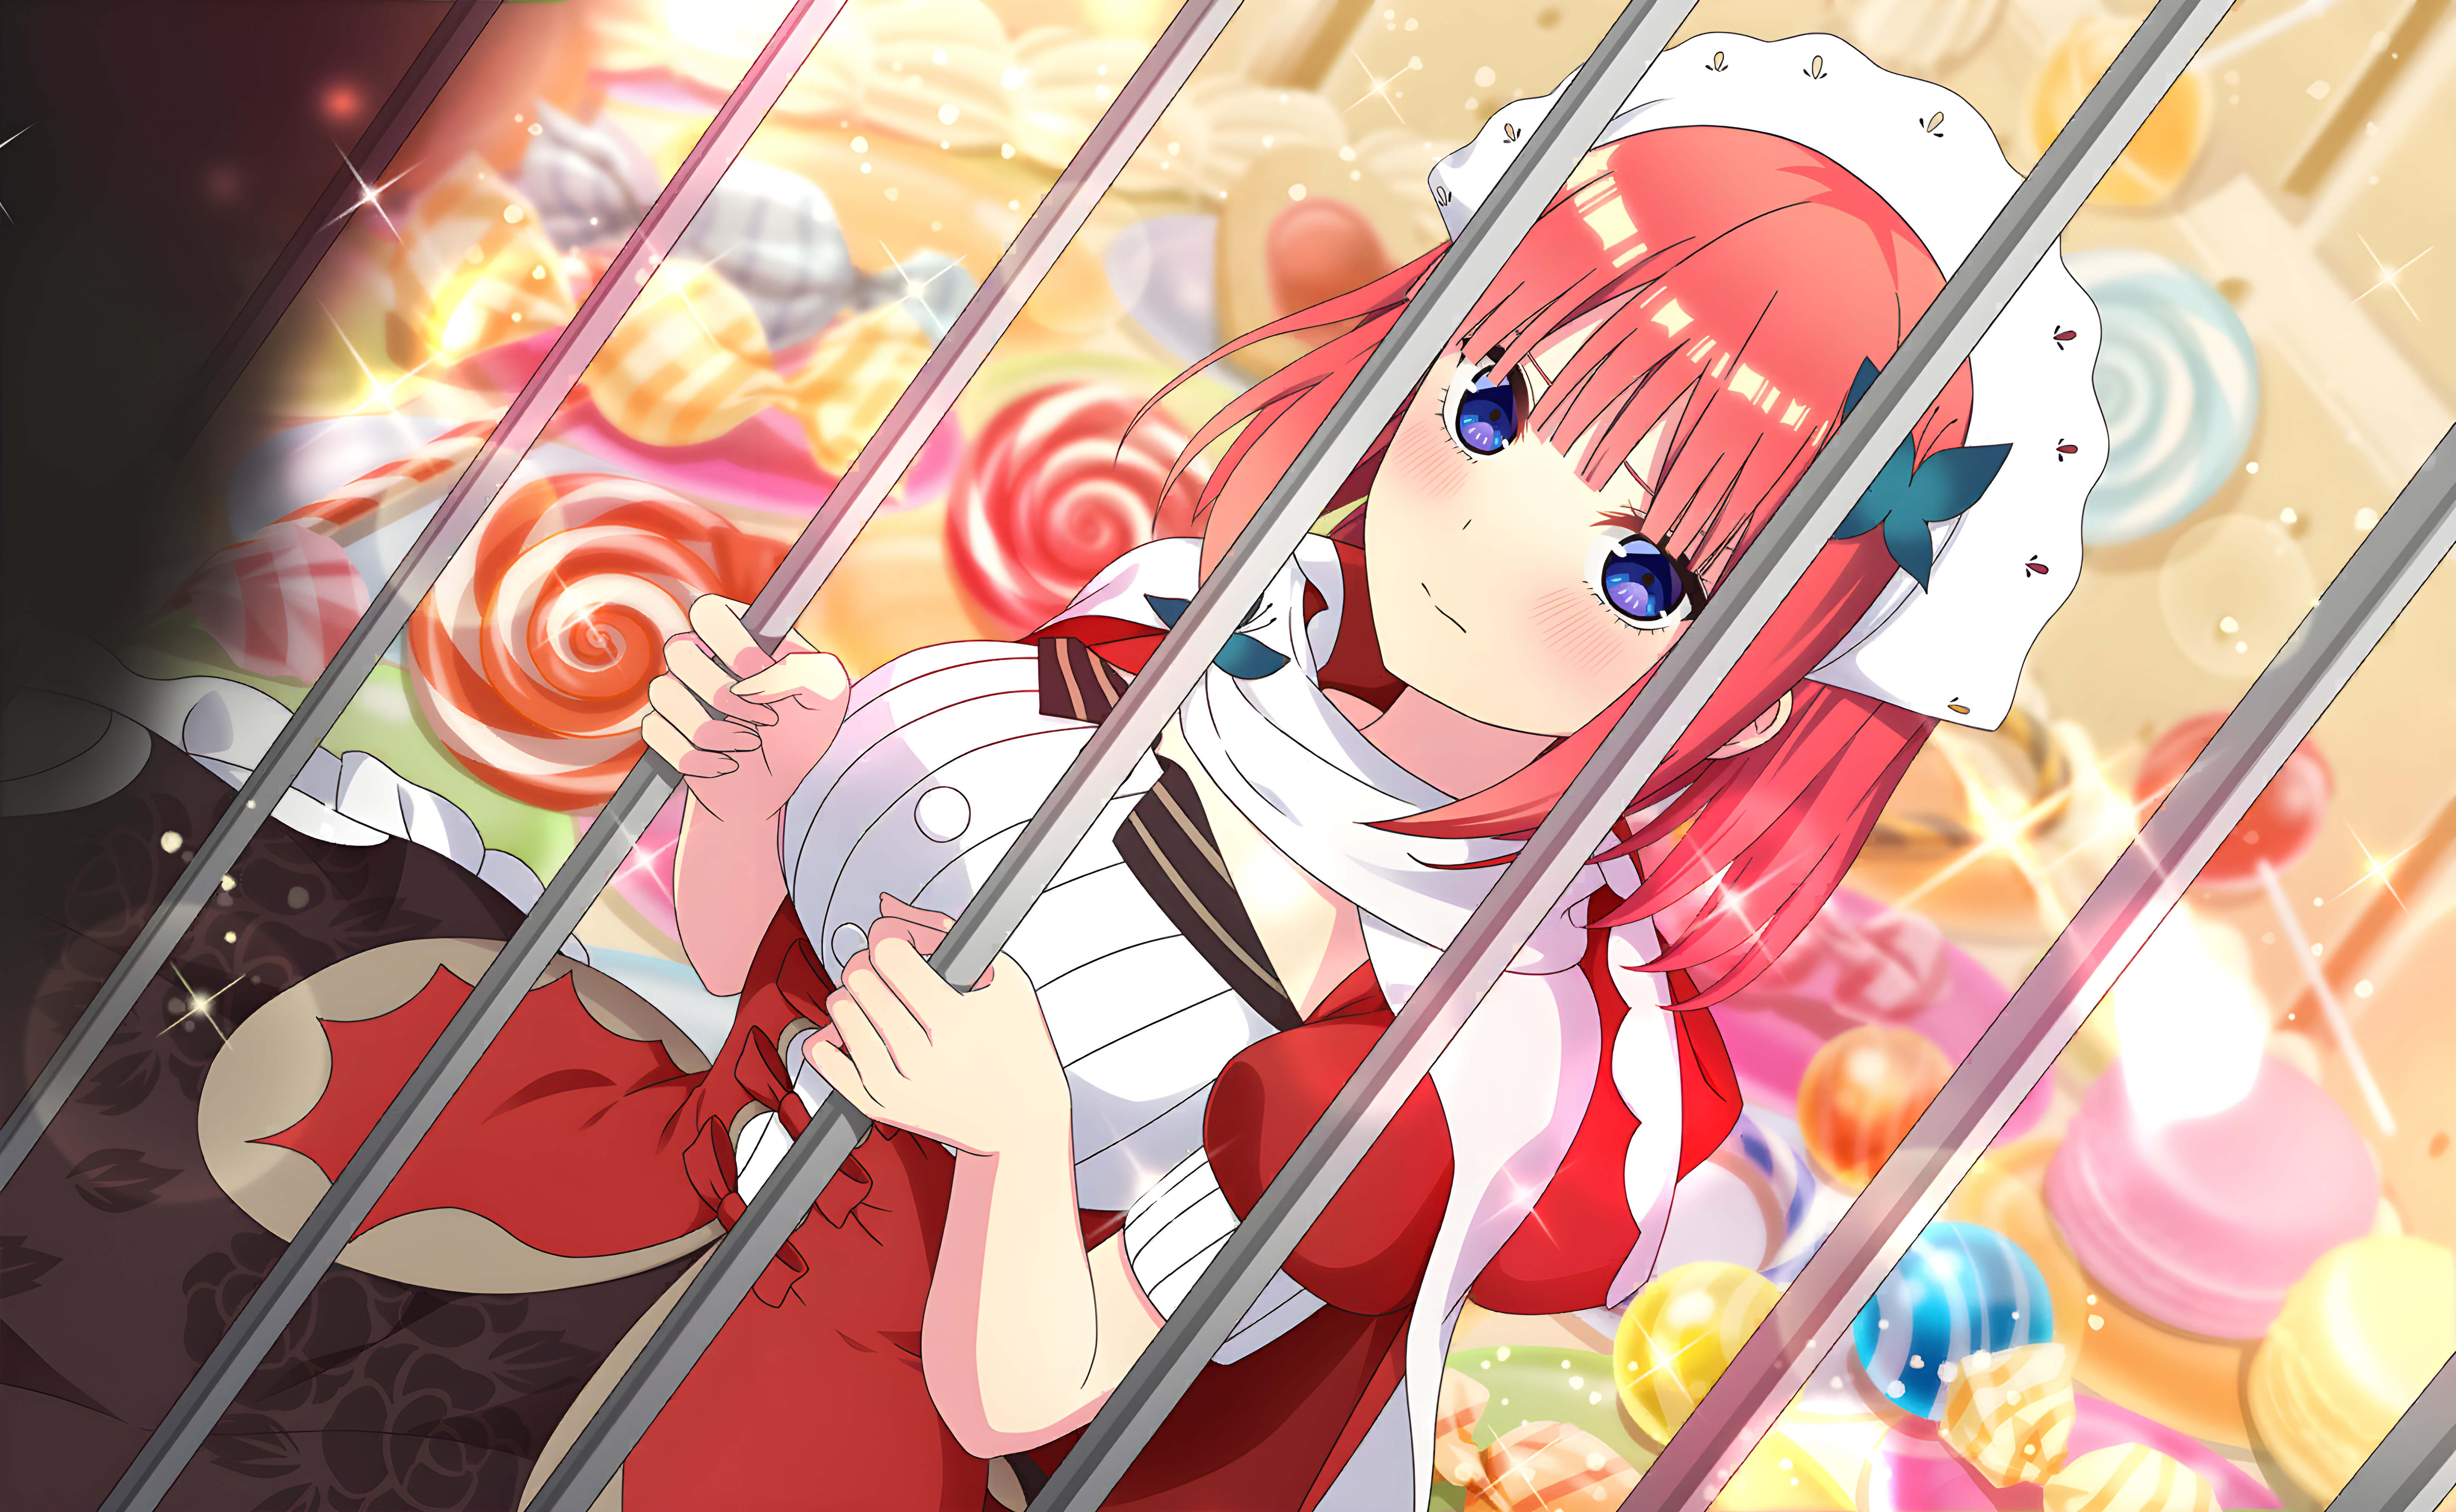 Who is your favorite and least favorite character in The Quintessential  Quintuplets,and why? : r/5ToubunNoHanayome